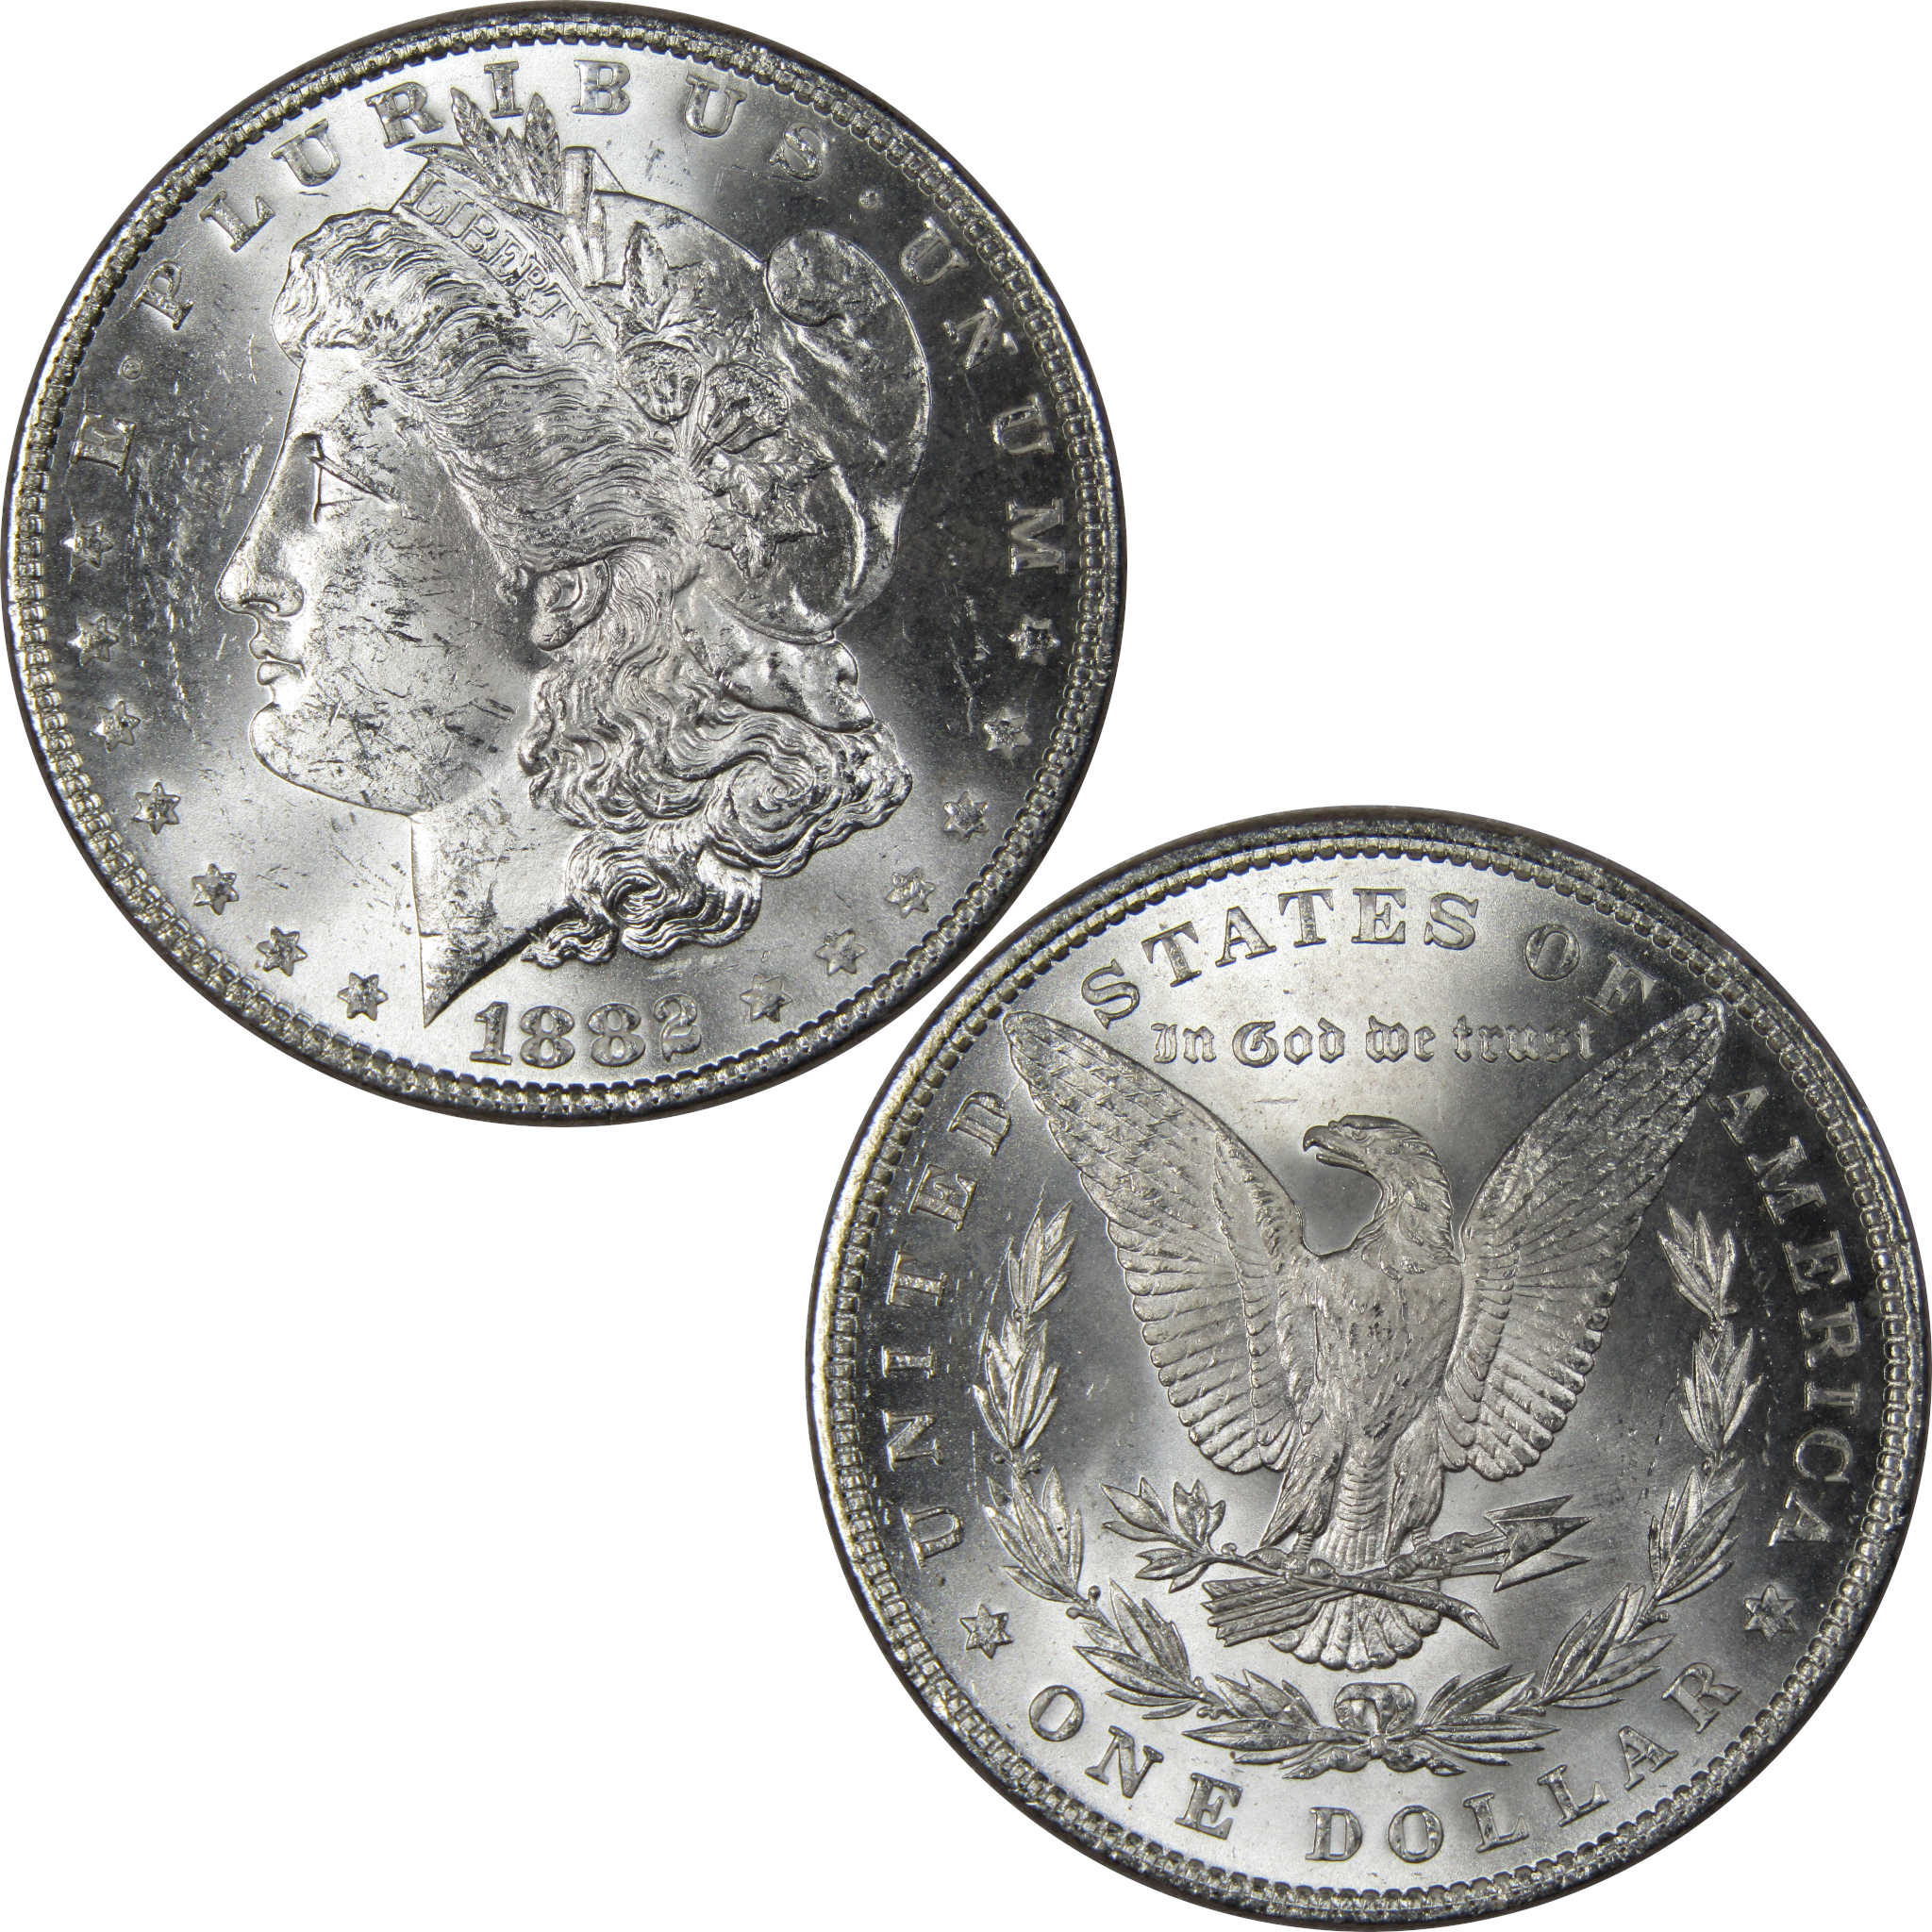 1882 Morgan Dollar BU Uncirculated Mint State 90% Silver SKU:IPC9653 - Morgan coin - Morgan silver dollar - Morgan silver dollar for sale - Profile Coins &amp; Collectibles